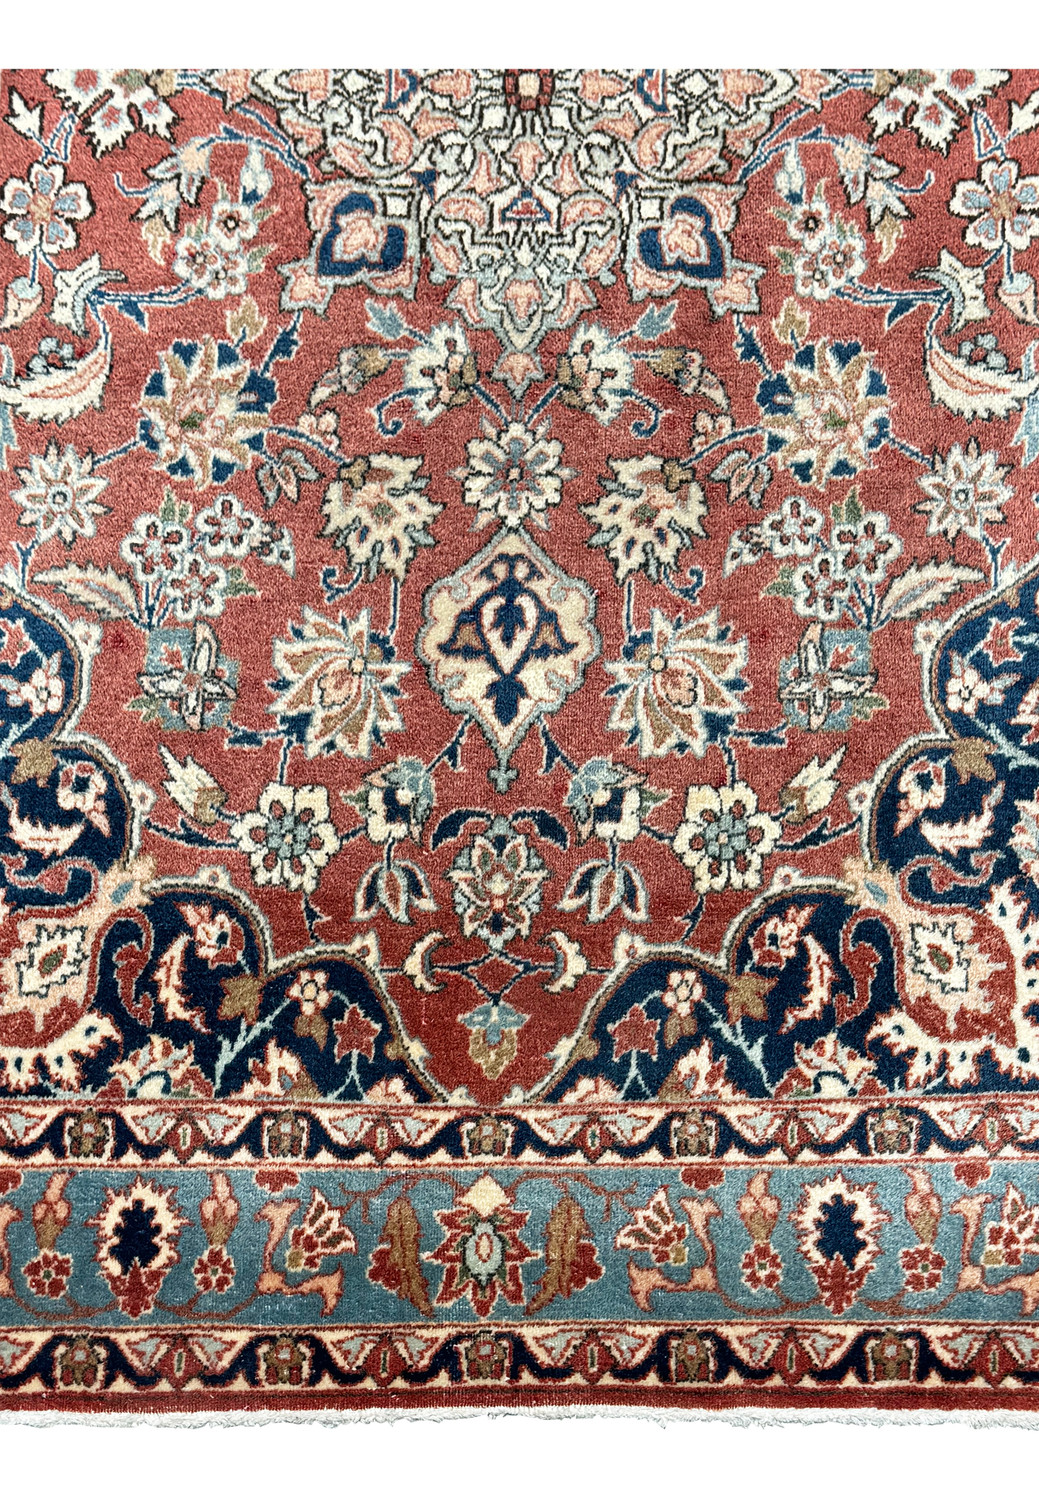 Close-up of intricate floral patterns on a 3x5 Antique Mashad Rug, showcasing the fine craftsmanship and rich colors